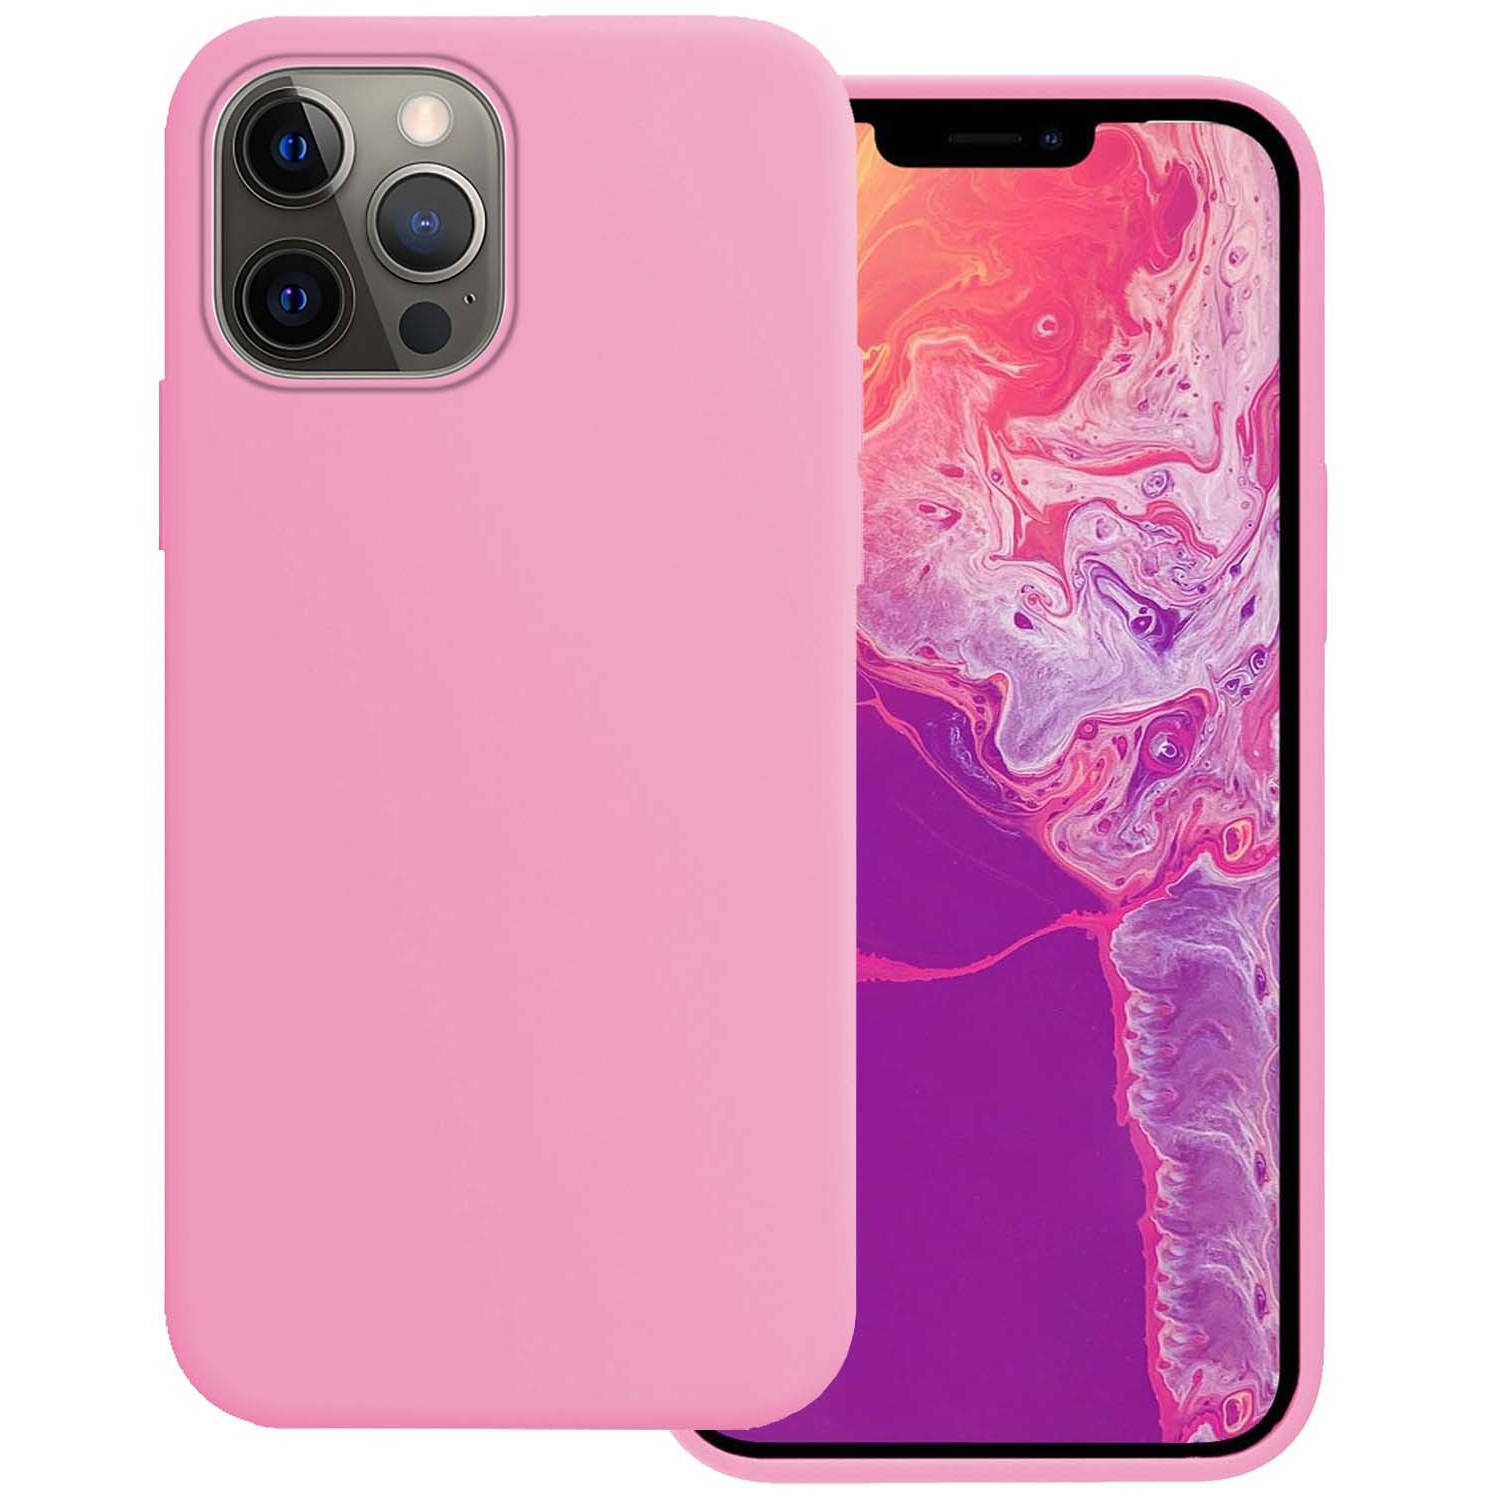 Basey iPhone 13 Pro Max Hoesje Siliconen Hoes Case Cover iPhone 13 Pro Max-Lichtroze